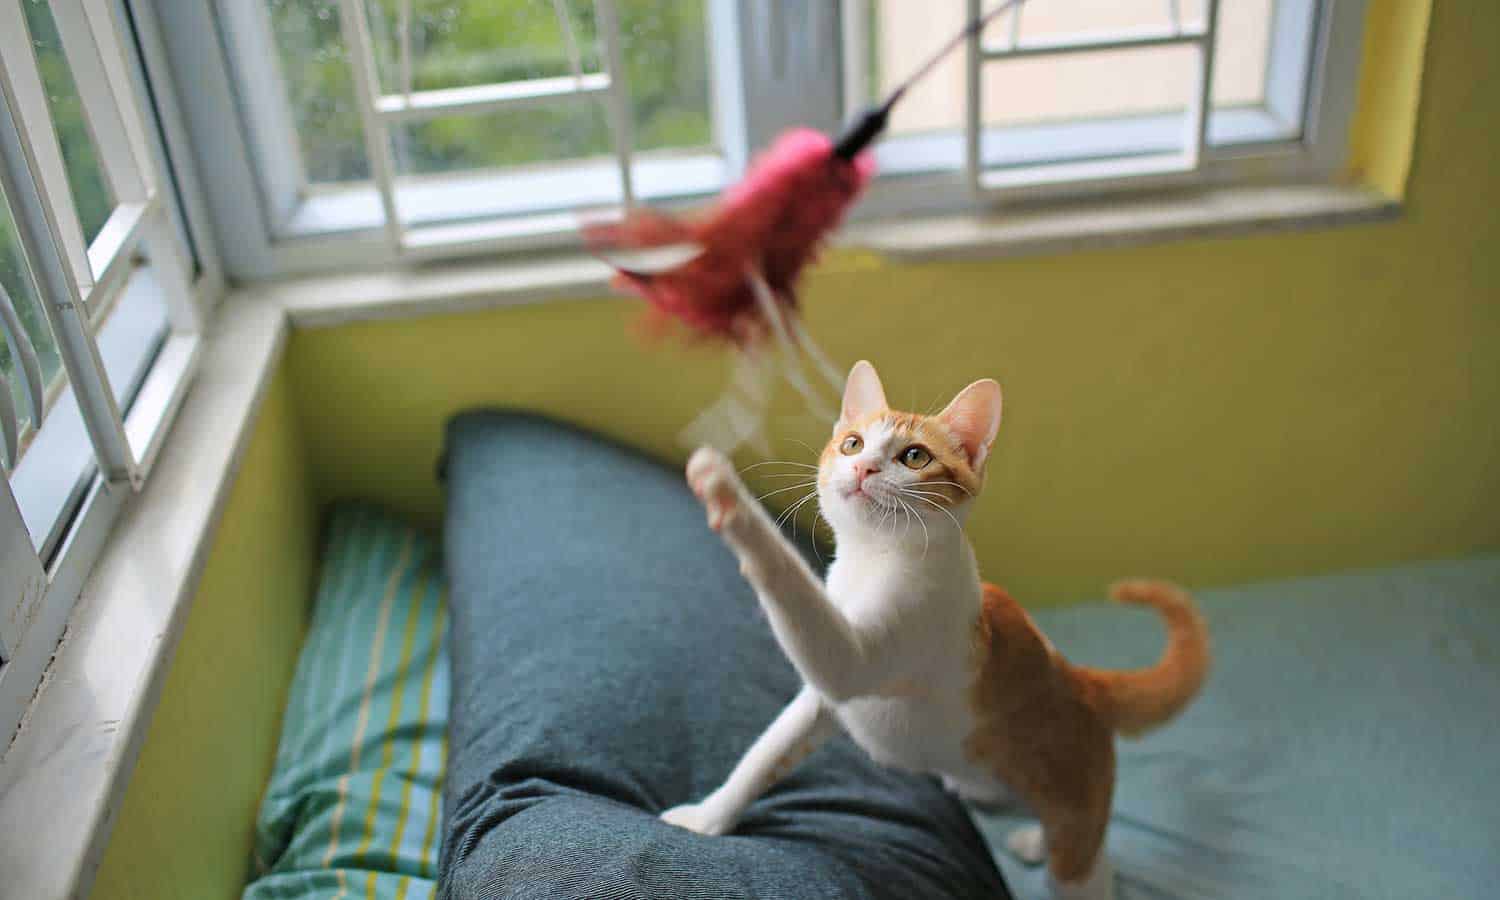 A cat playing with a feather toy